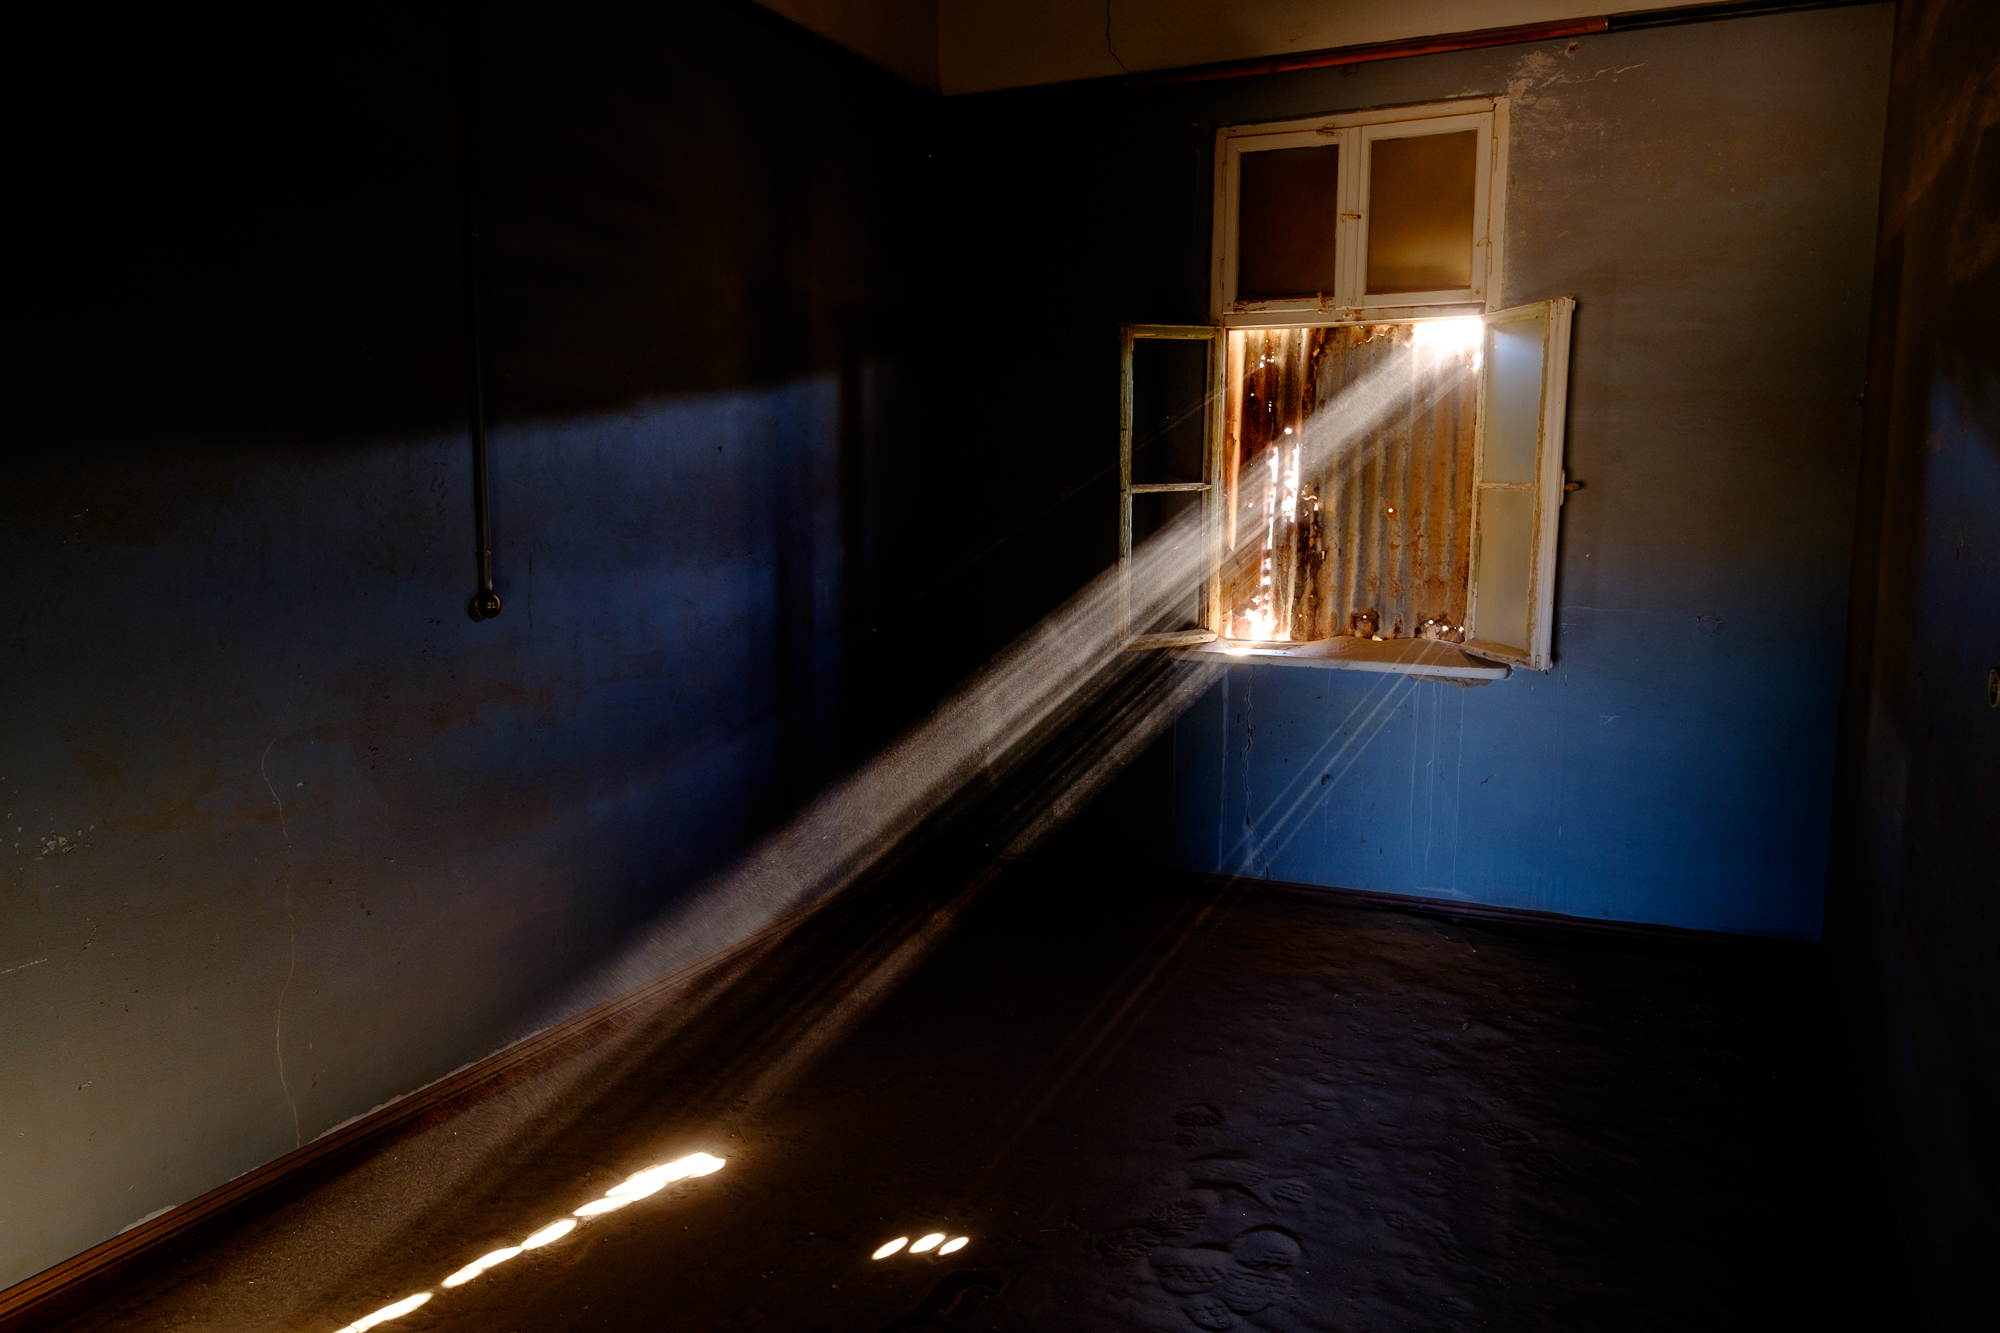 Light beams through rusted iron boarding up the window of this room in the school